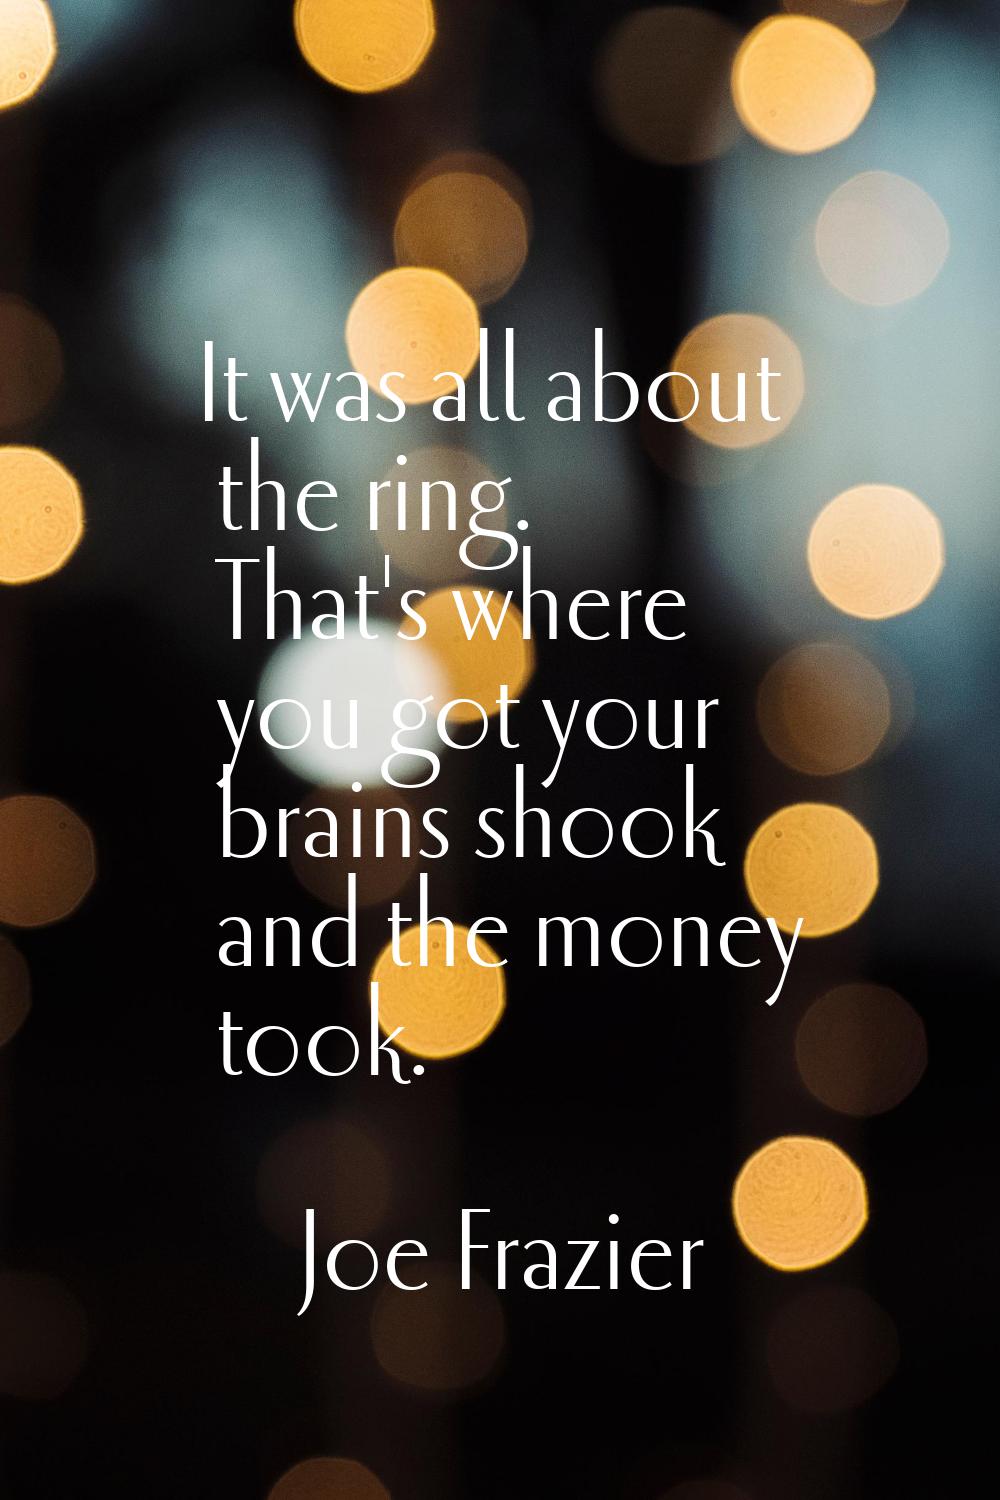 It was all about the ring. That's where you got your brains shook and the money took.